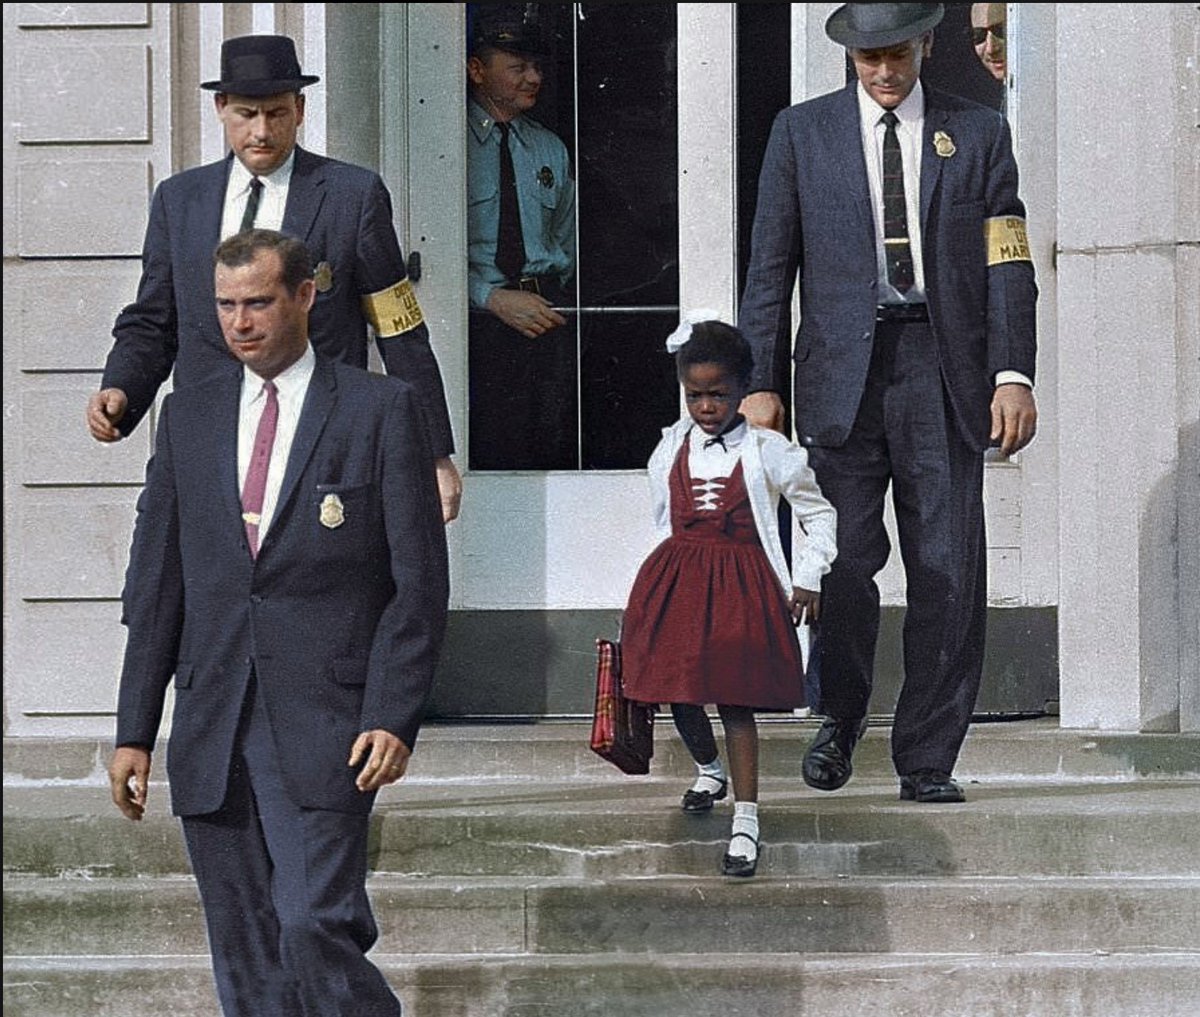 Meet Ruby Bridges. At 6 years old, she was the first Black child to attend an all-white elementary school in the American South. ⁠⁠For her to attend school her first day, federal marshals with guns had to make way through a crowd of grown men and women screaming “n*gger”.